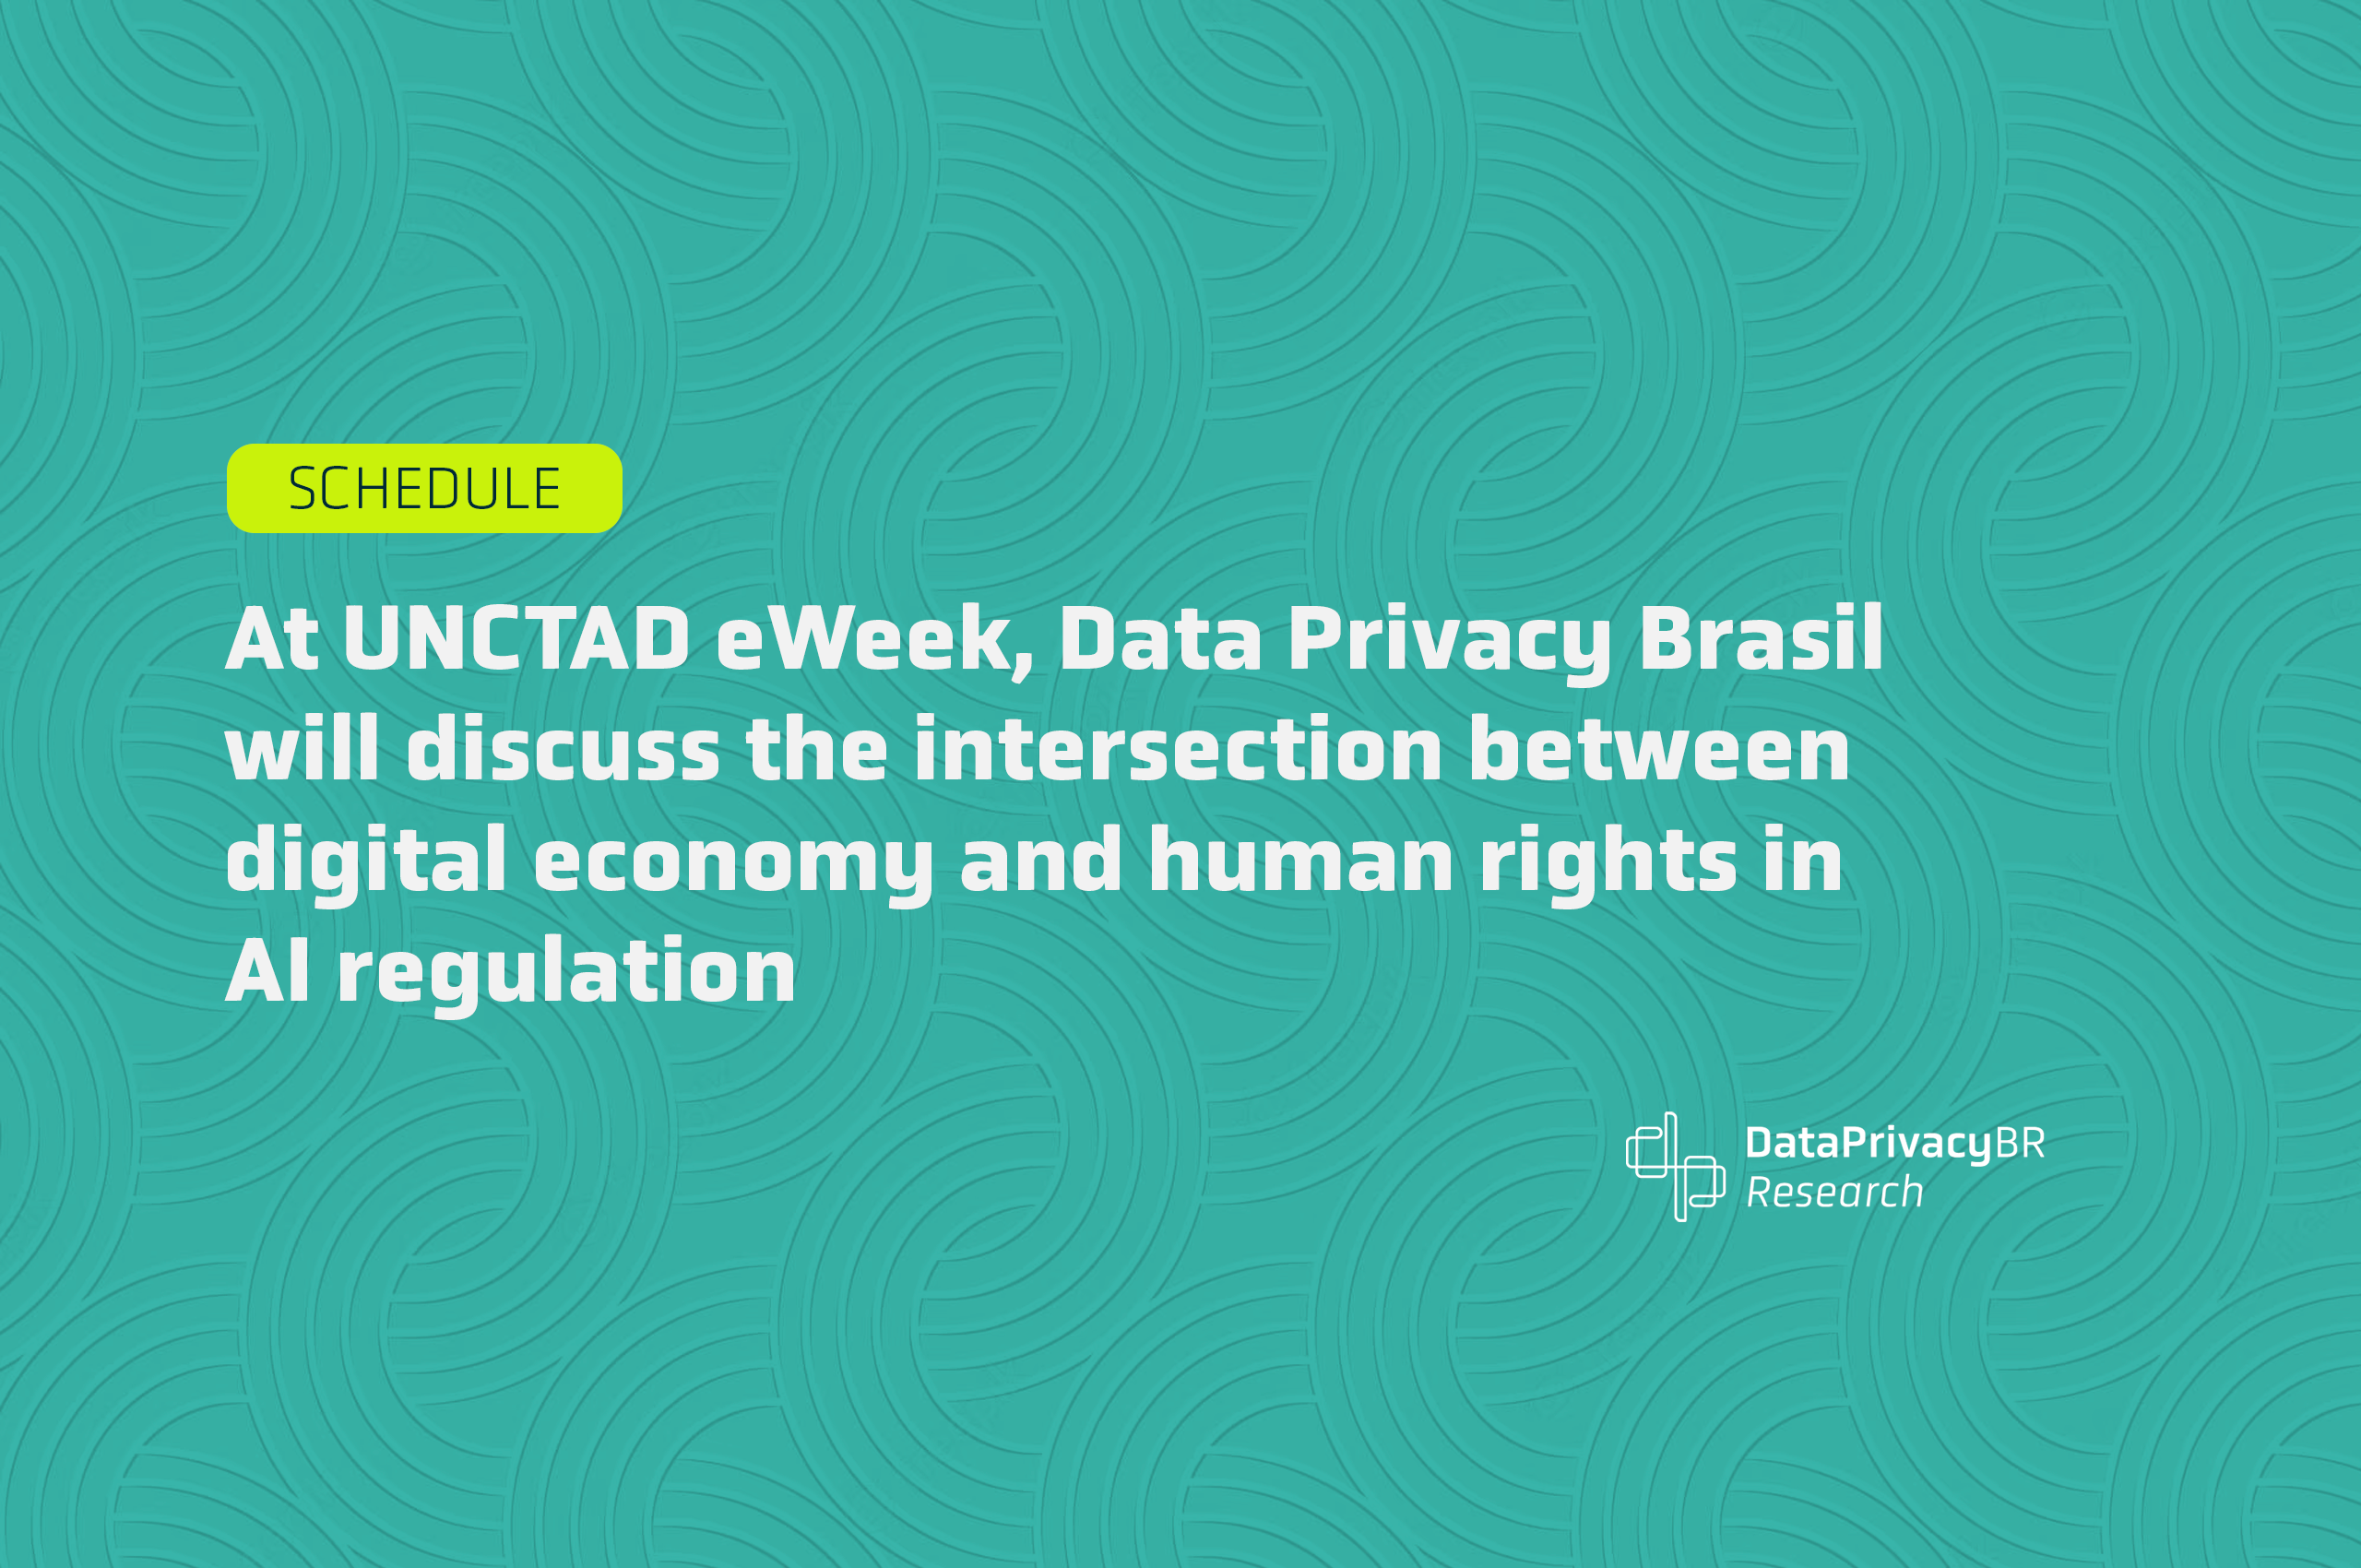 http://At%20UNCTAD%20eWeek,%20Data%20Privacy%20Brasil%20will%20discuss%20the%20intersection%20between%20digital%20economy%20and%20human%20rights%20in%20AI%20regulation